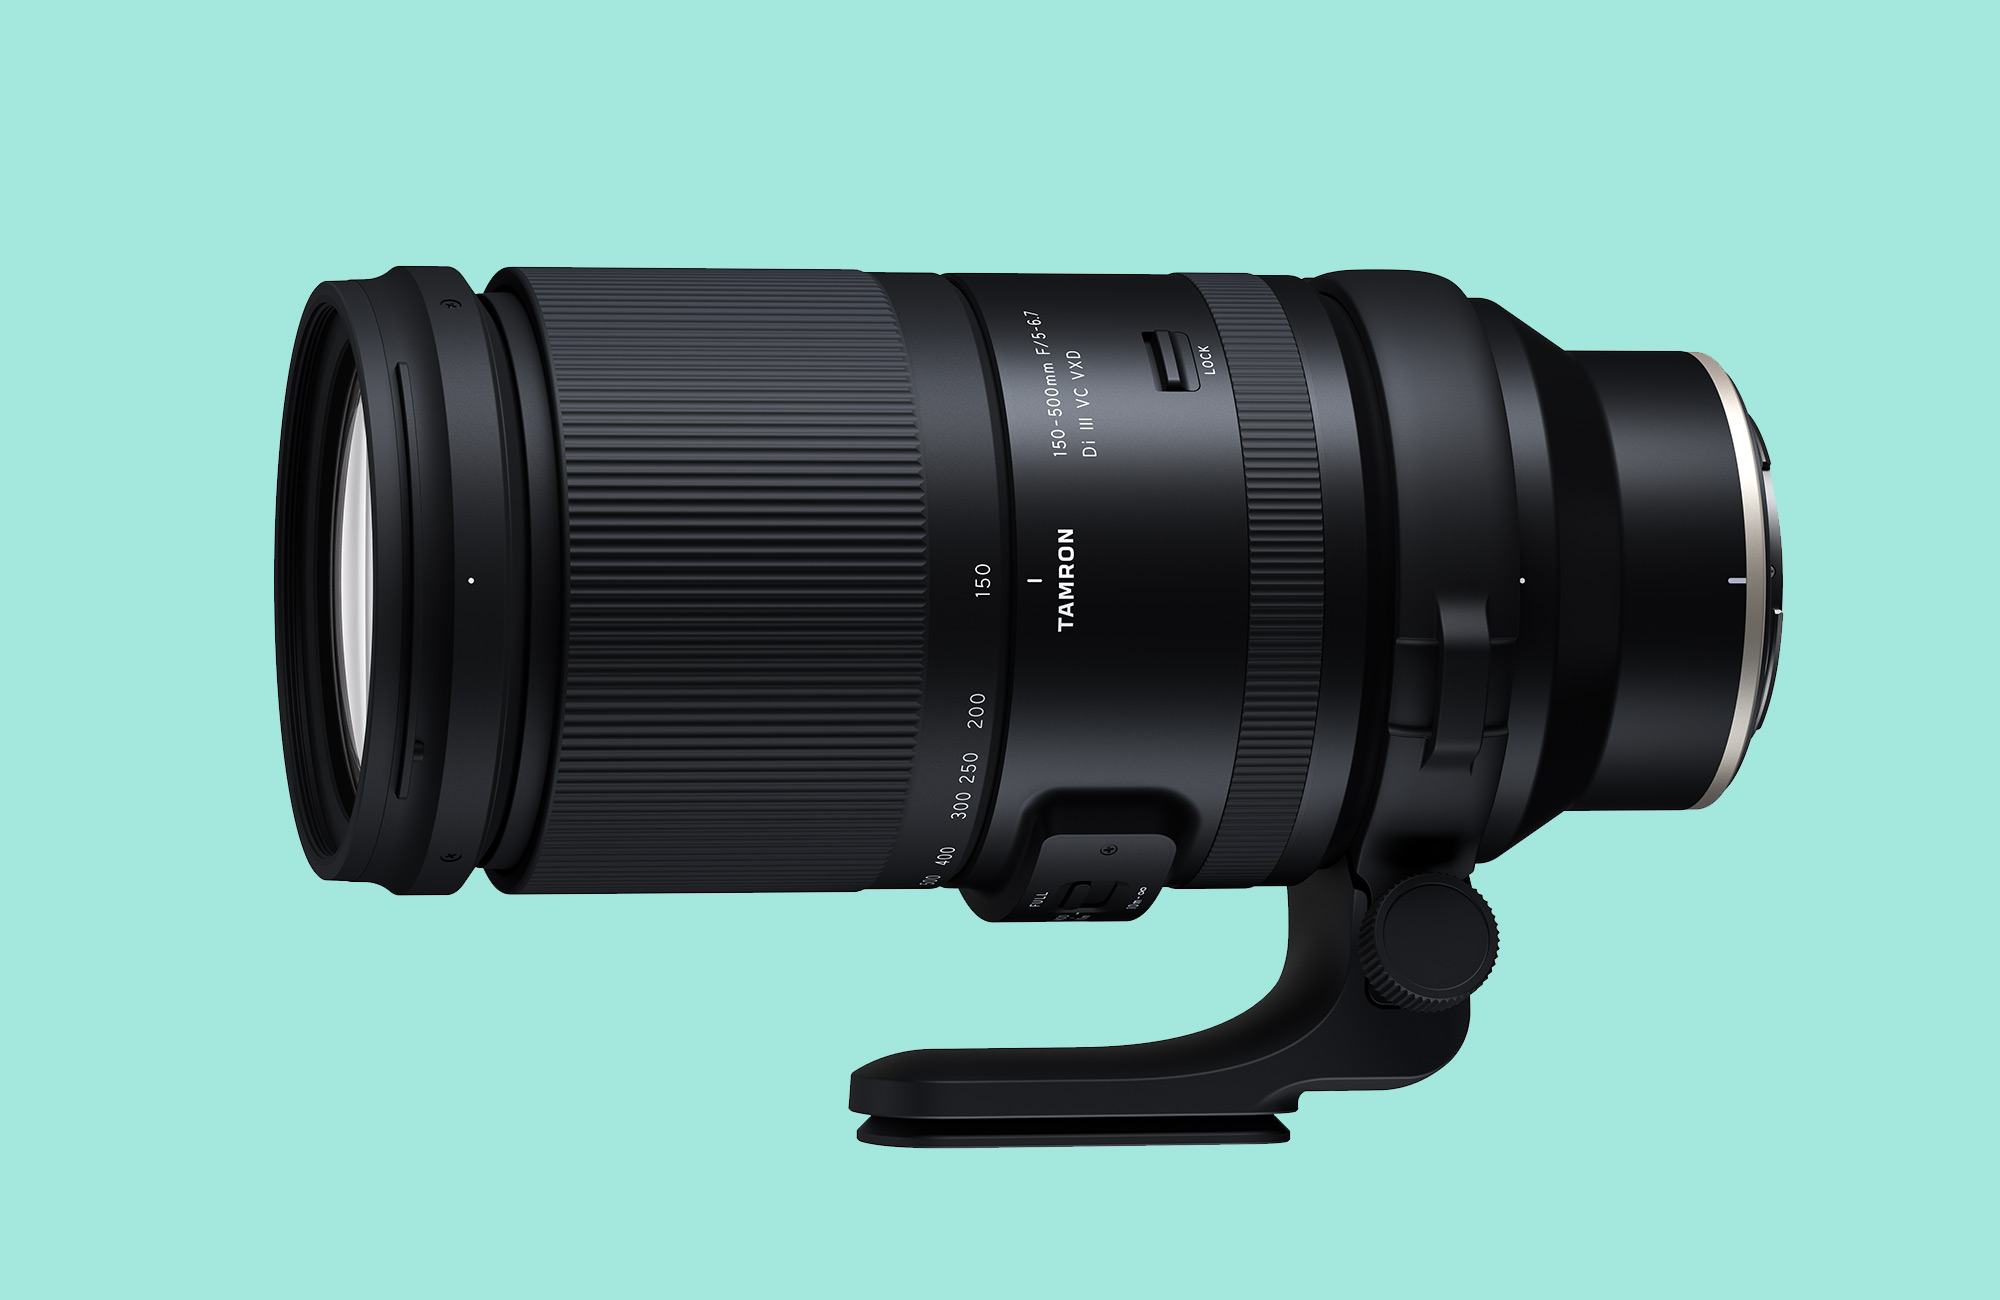 Tamron announces the 150-500mm F/5-6.7 telephoto zoom lens for